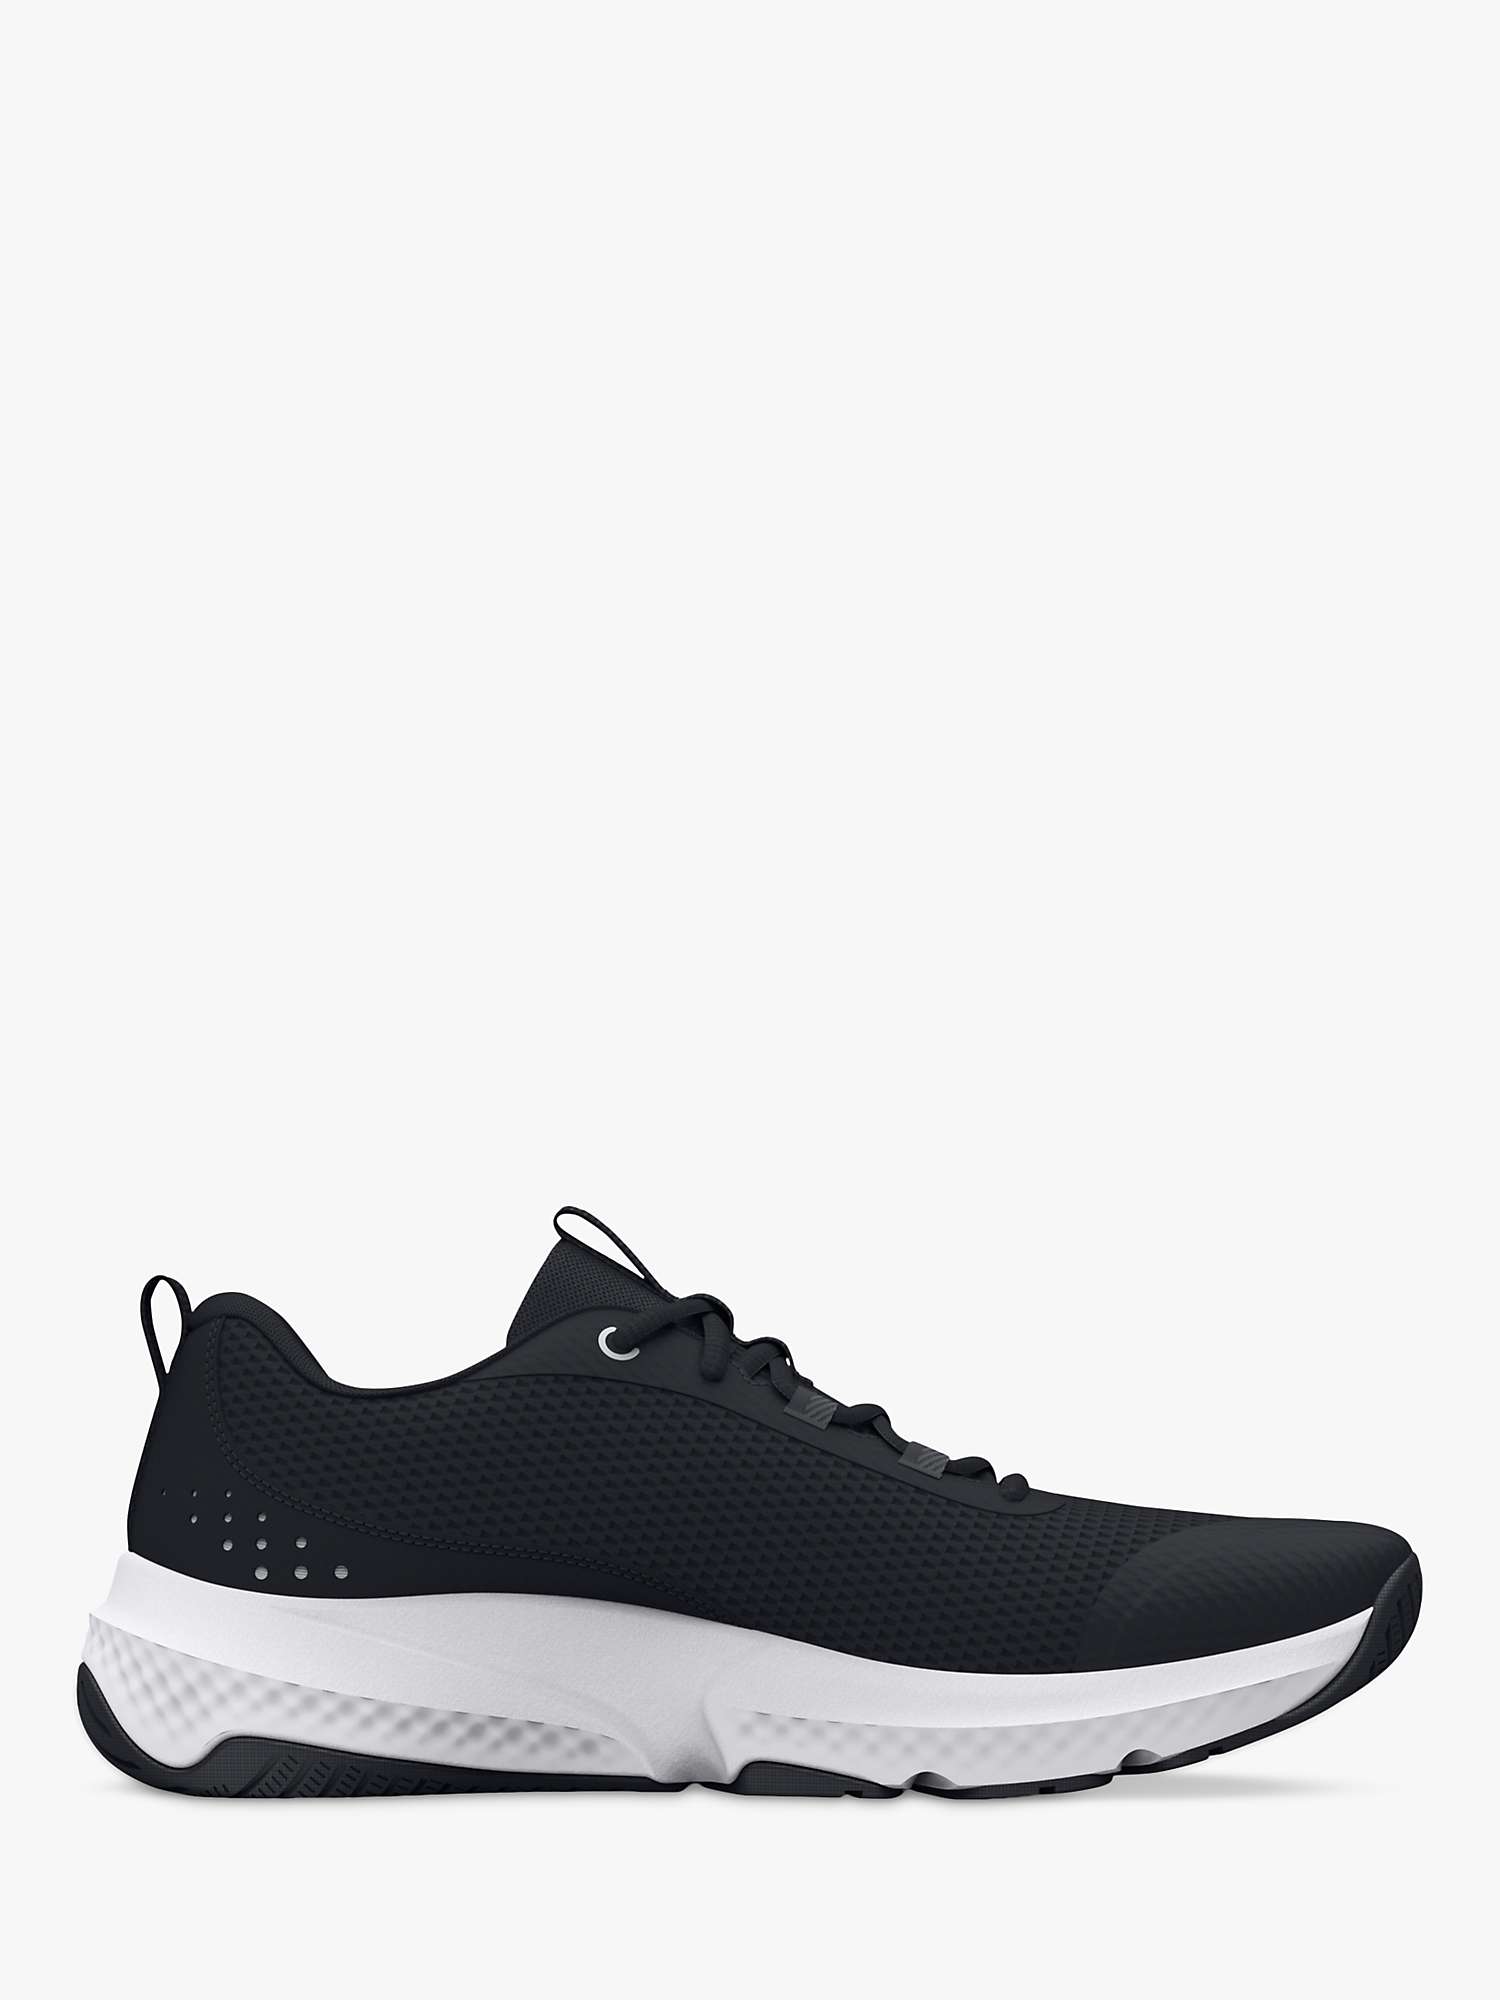 Buy Under Armour Dynamic Select Women's Cross Trainers Online at johnlewis.com